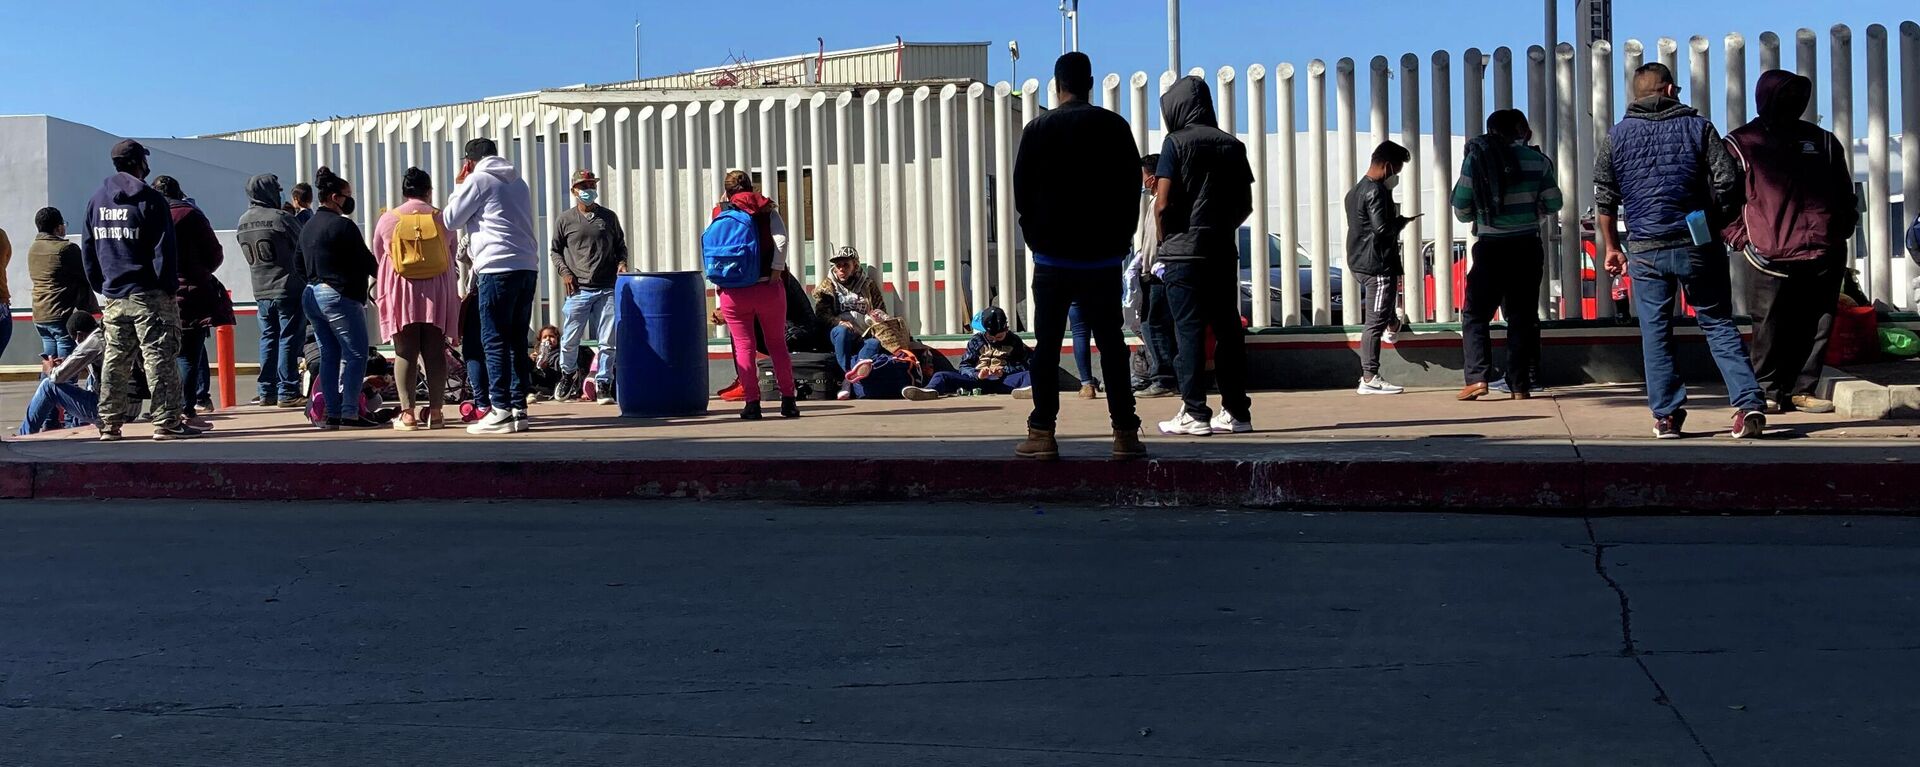 Migrants waiting to cross into the United States wait for news at the border crossing Wednesday, Feb. 17, 2021, in Tijuana, Mexico.   - Sputnik International, 1920, 24.04.2022